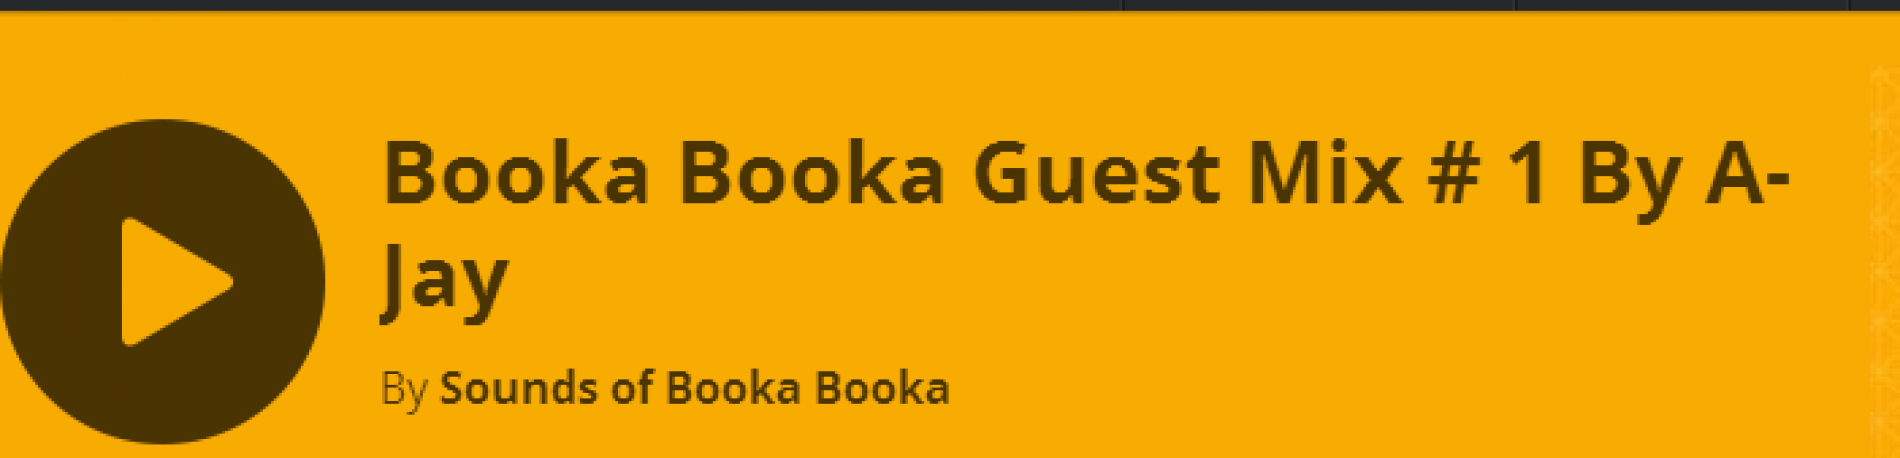 Booka Booka Guest Mix # 1 By A-Jay